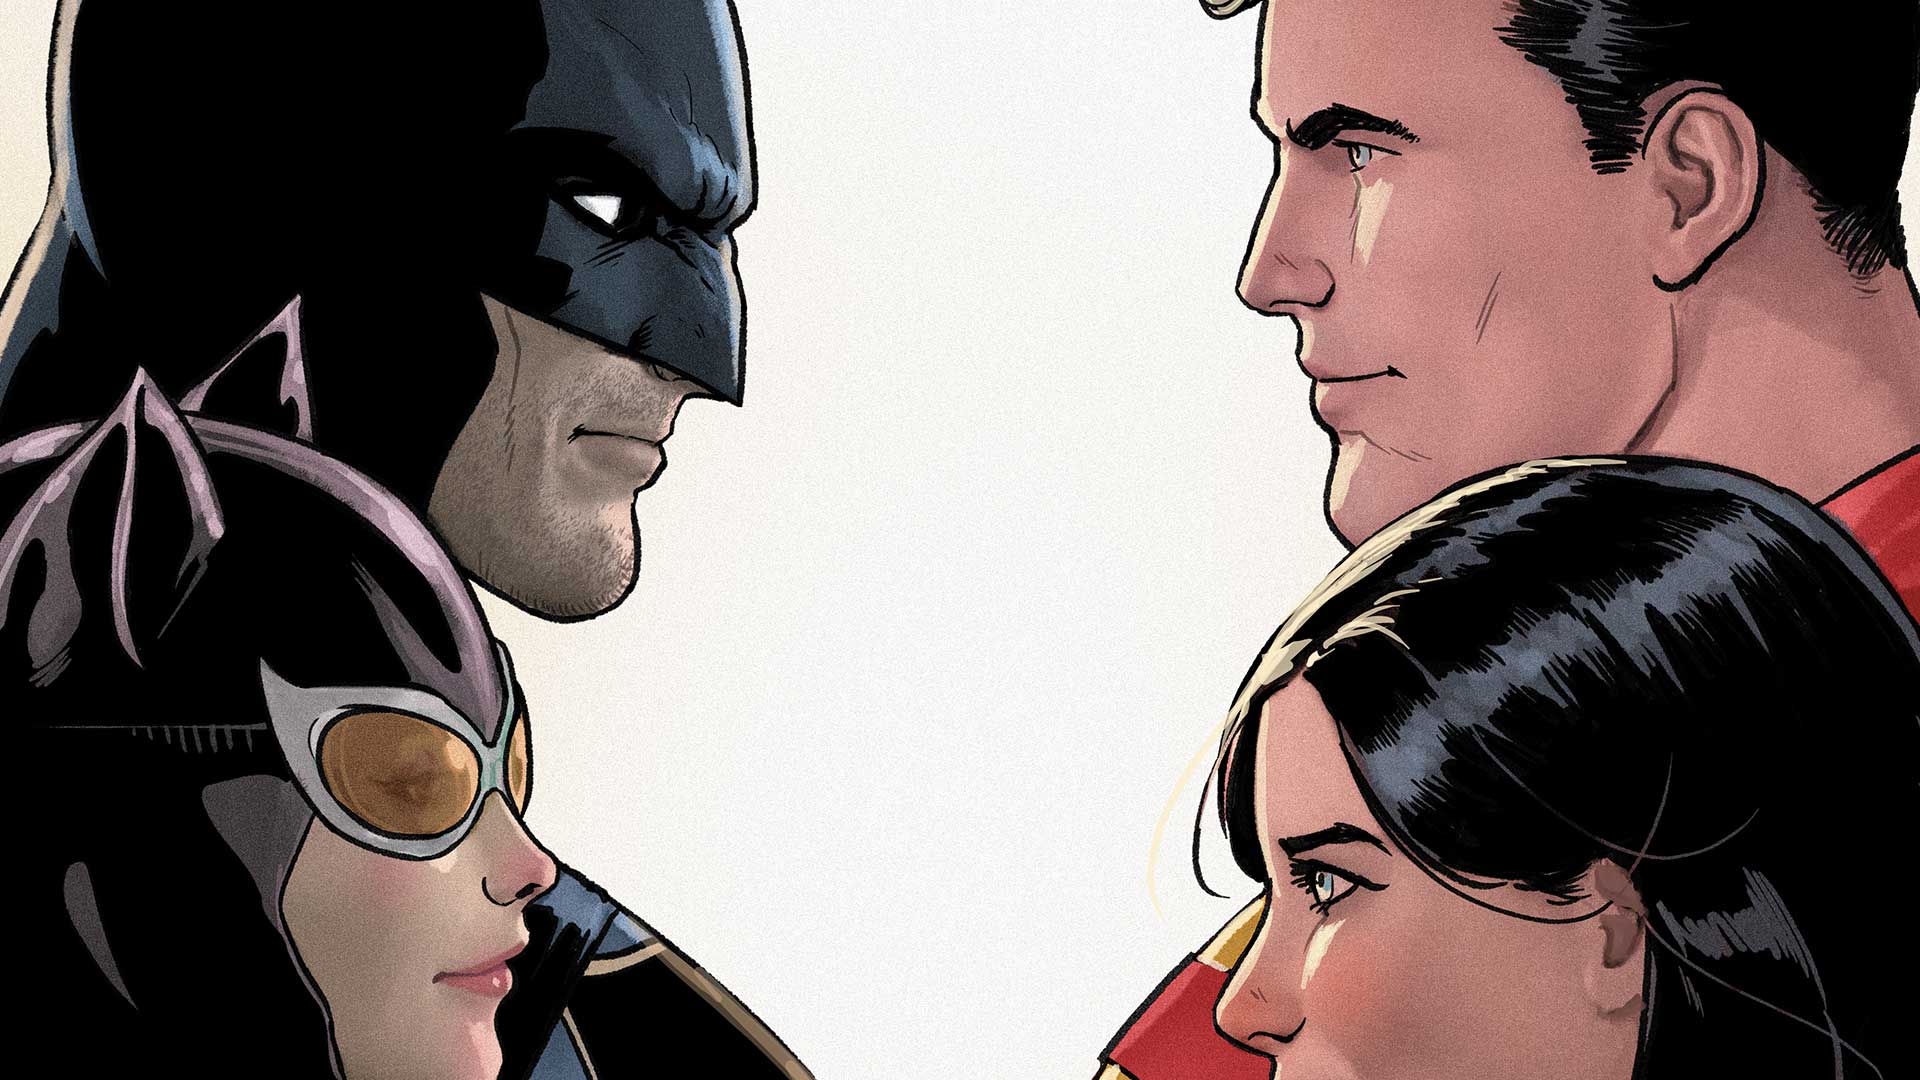 Batman and Superman team up for a double date in 'Batman #37'